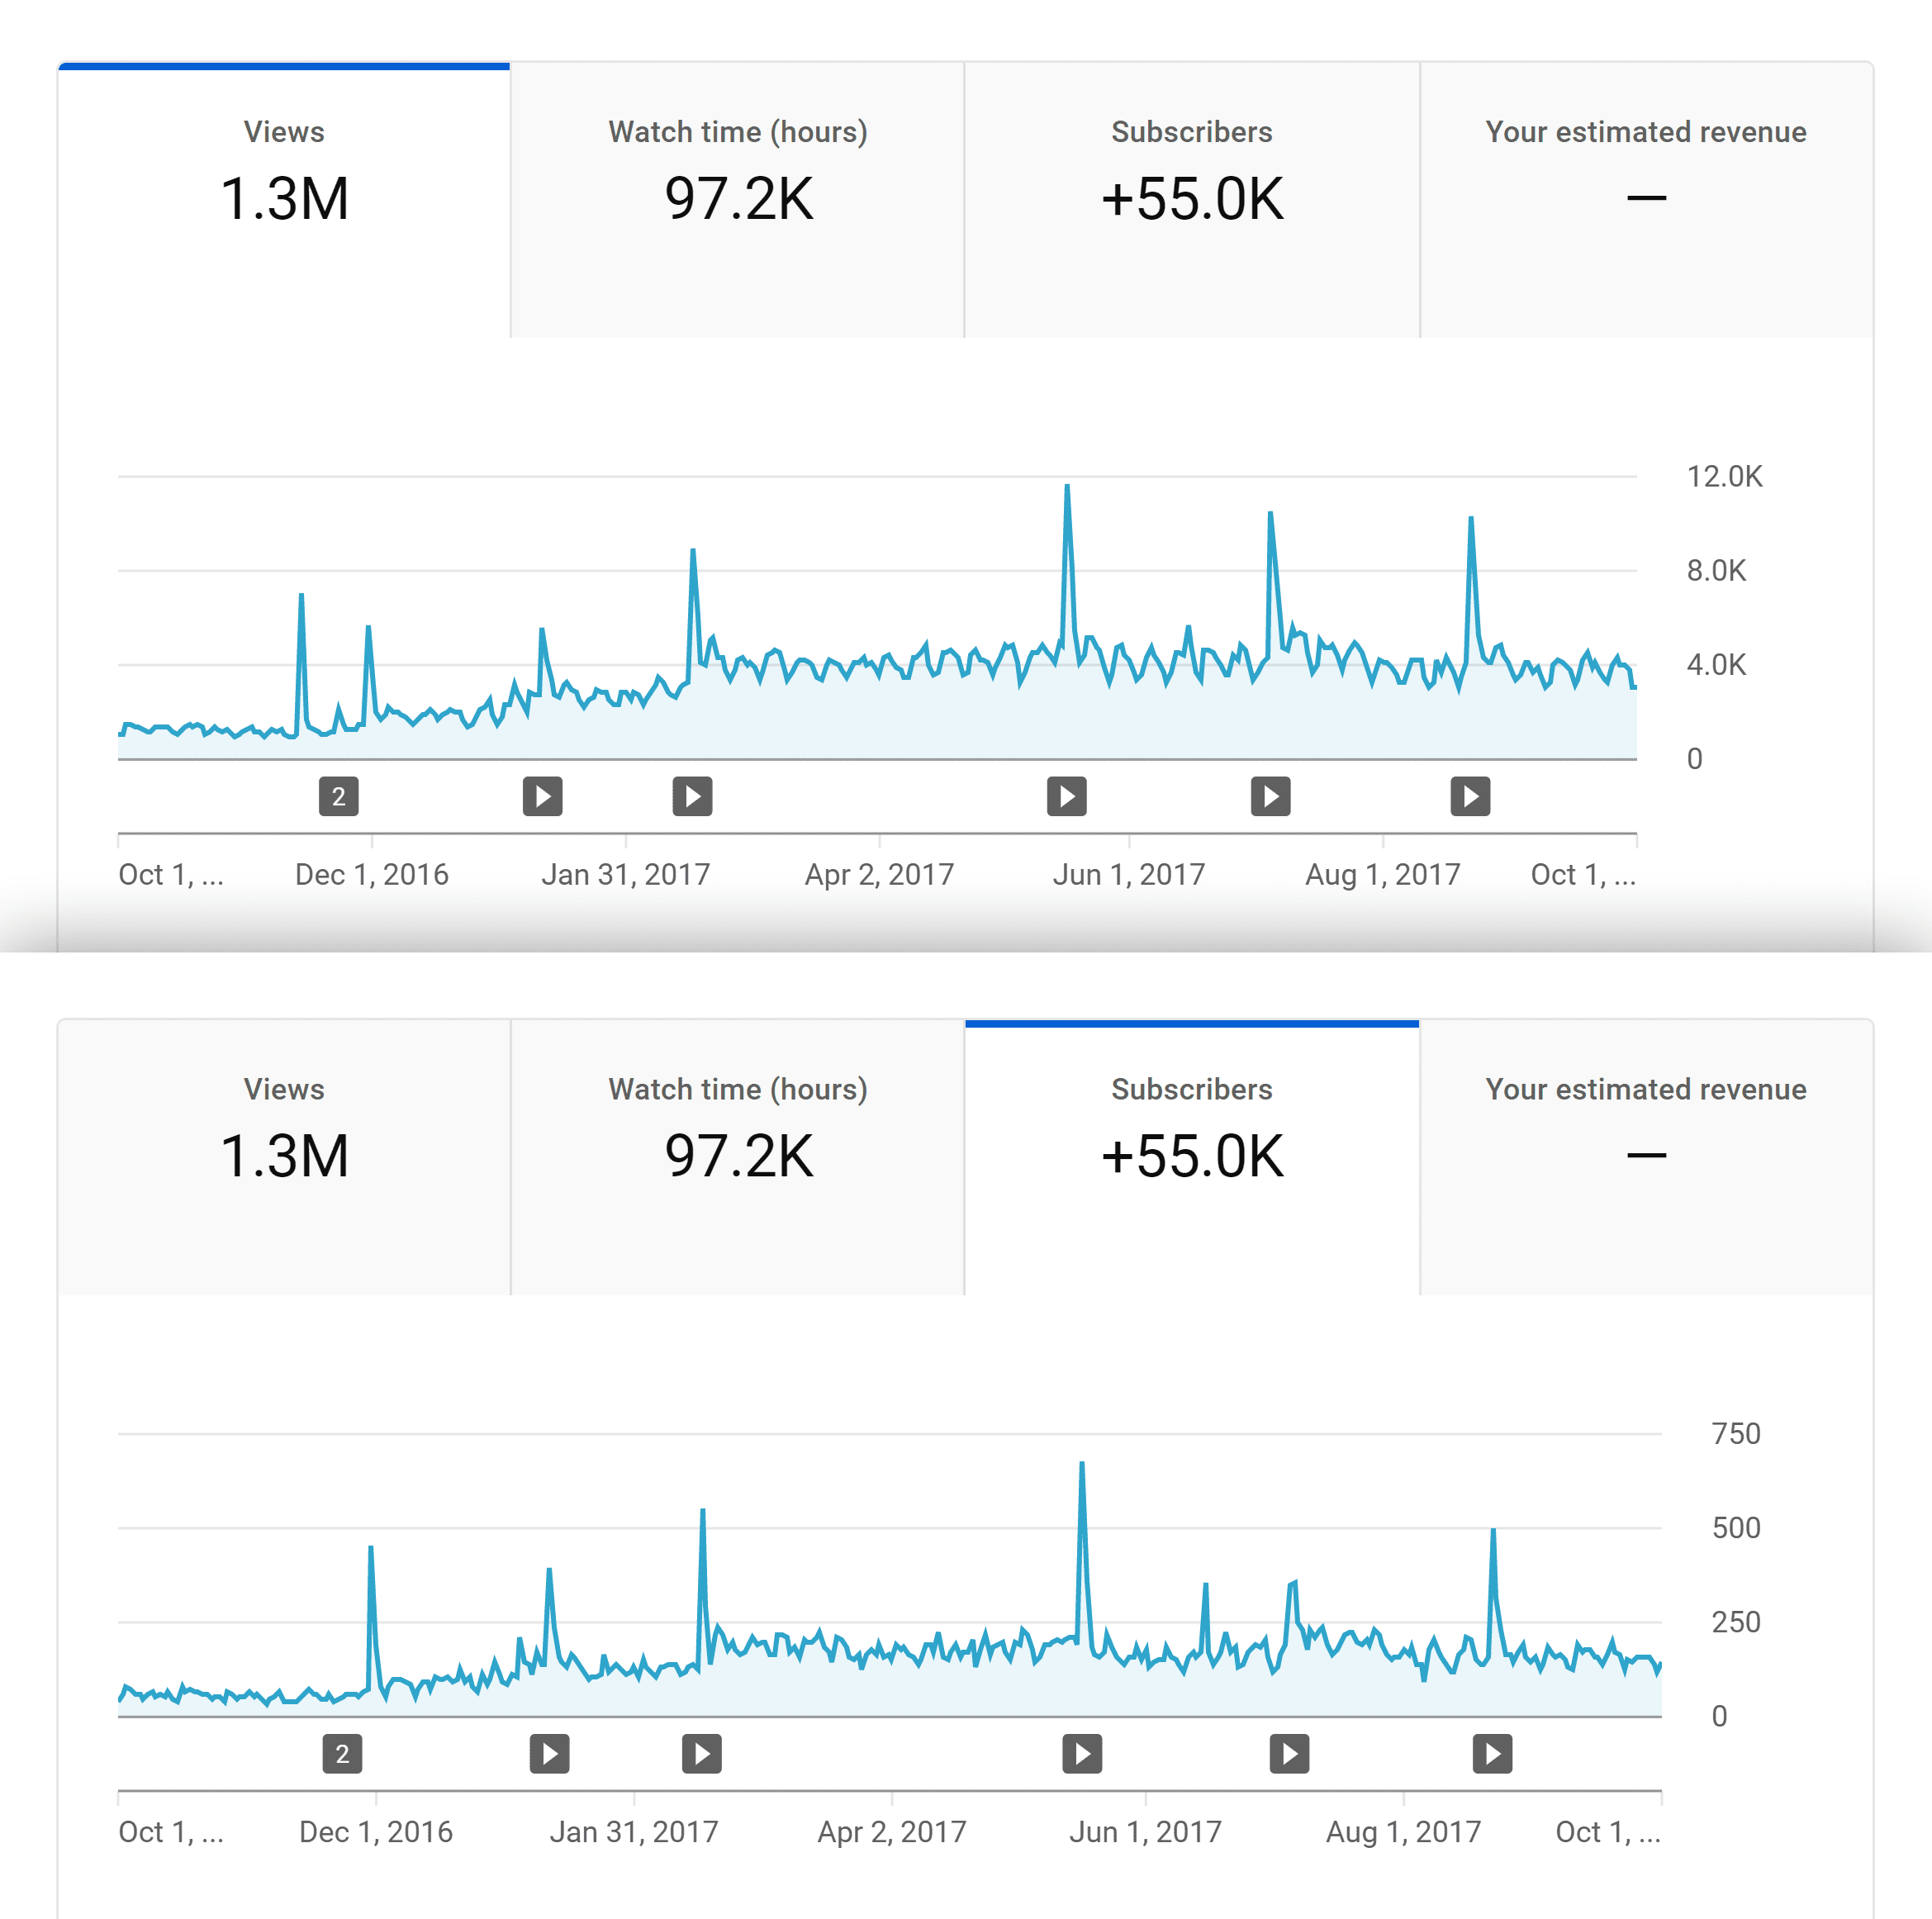 Views and subscribers after update